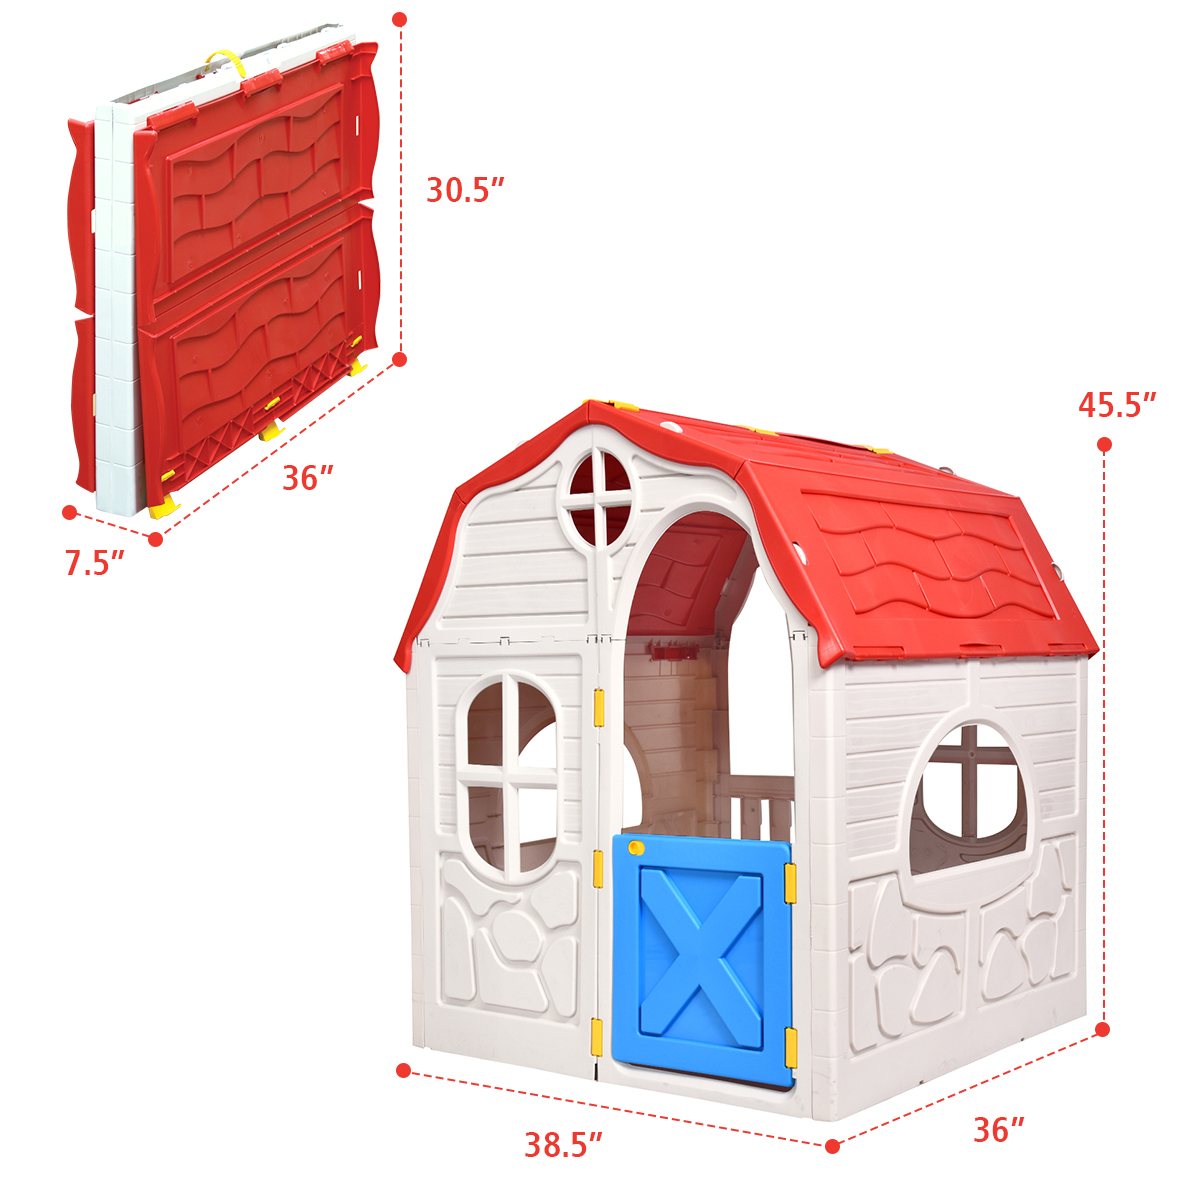 Costway Kids Cottage Playhouse Foldable Plastic Play House Indoor Outdoor Toy Portable